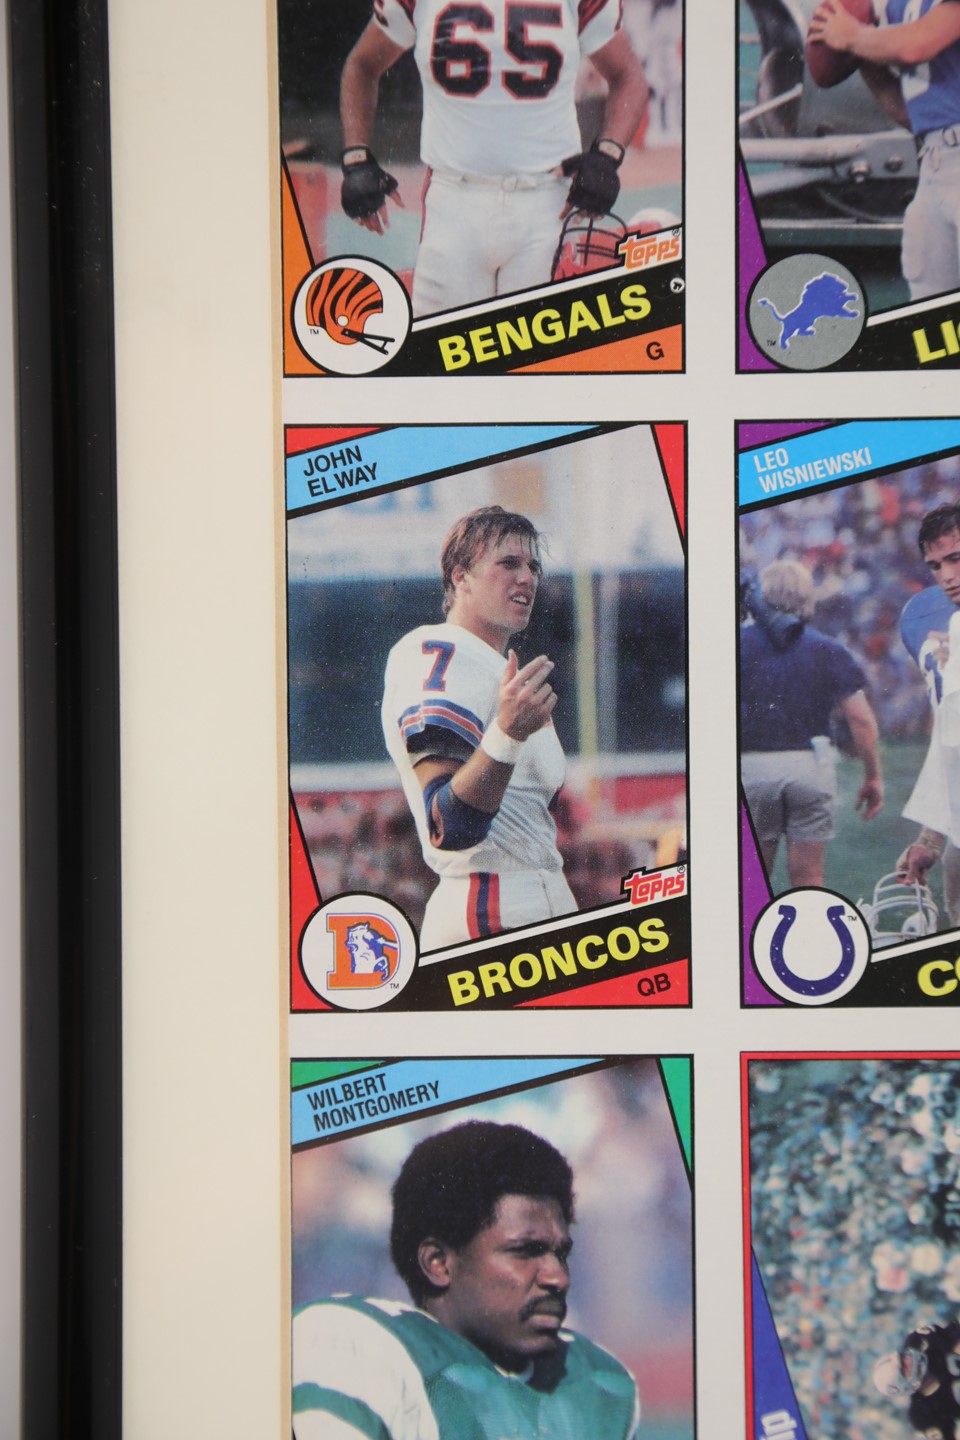 - 1984 Topps Football Uncut Sheet with Marino and Elway Rookies